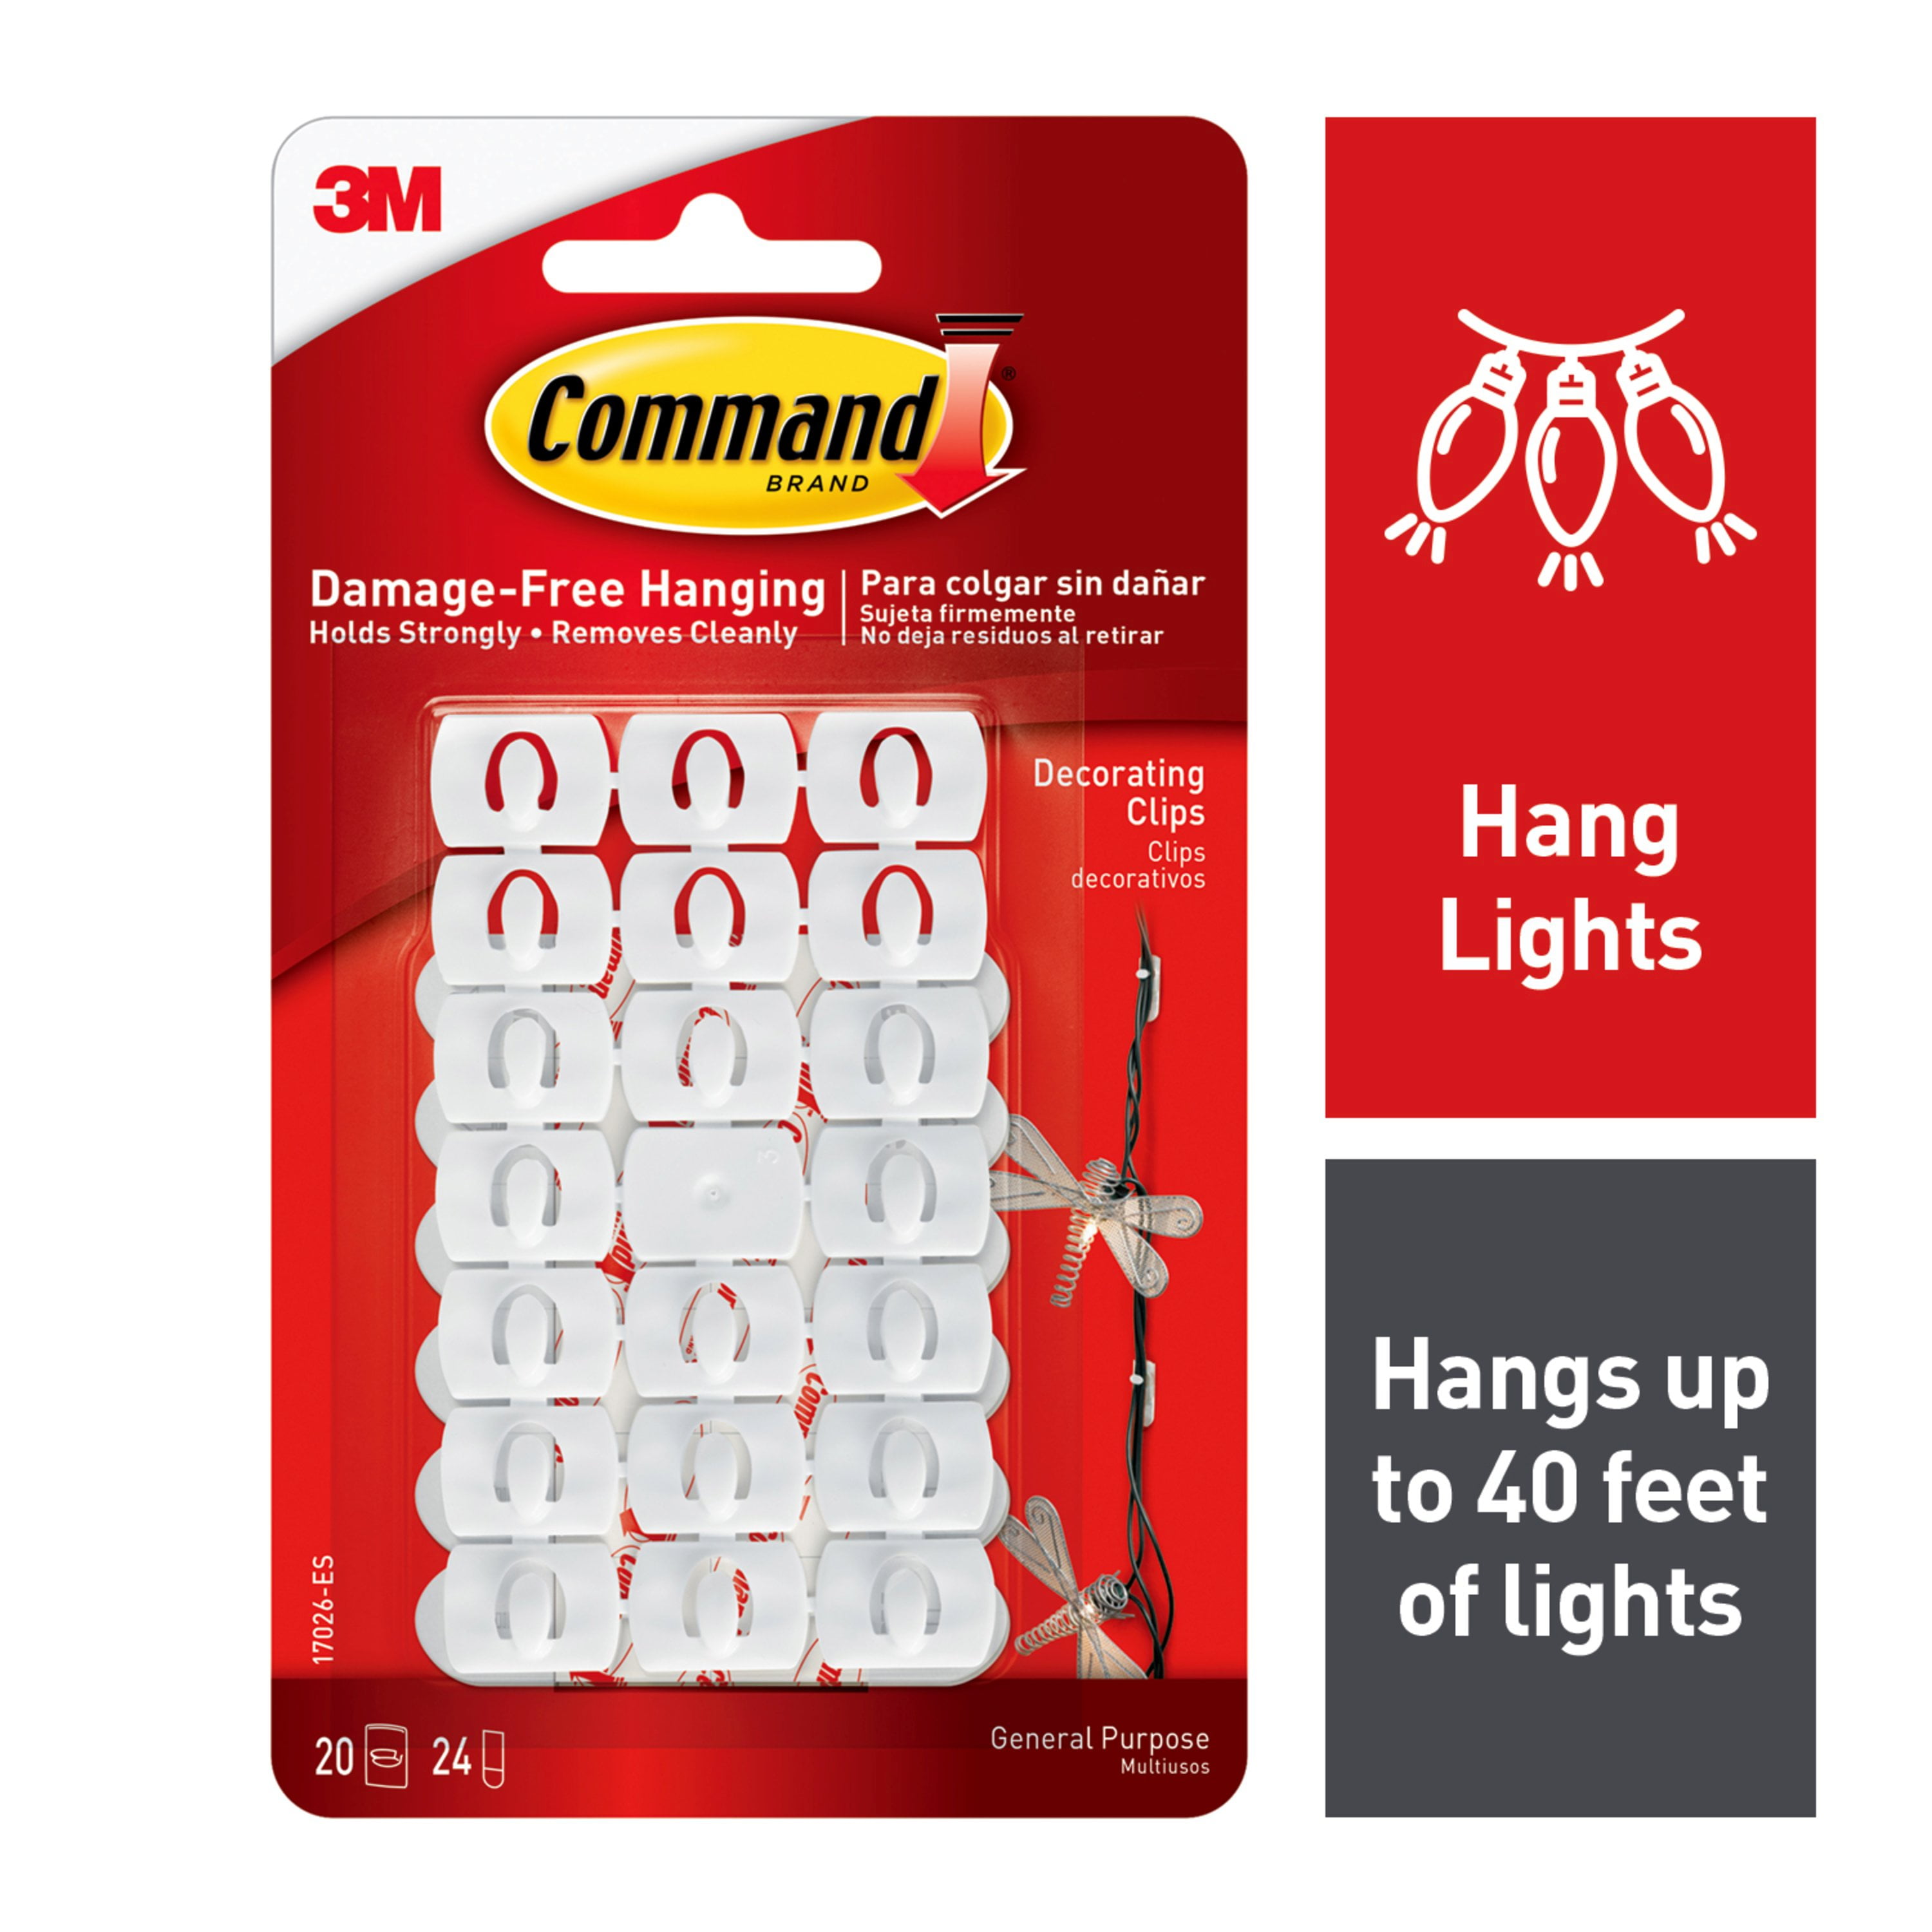 48 strips 17026-40ES Command Decorating Clips Value Pack 40 clips 